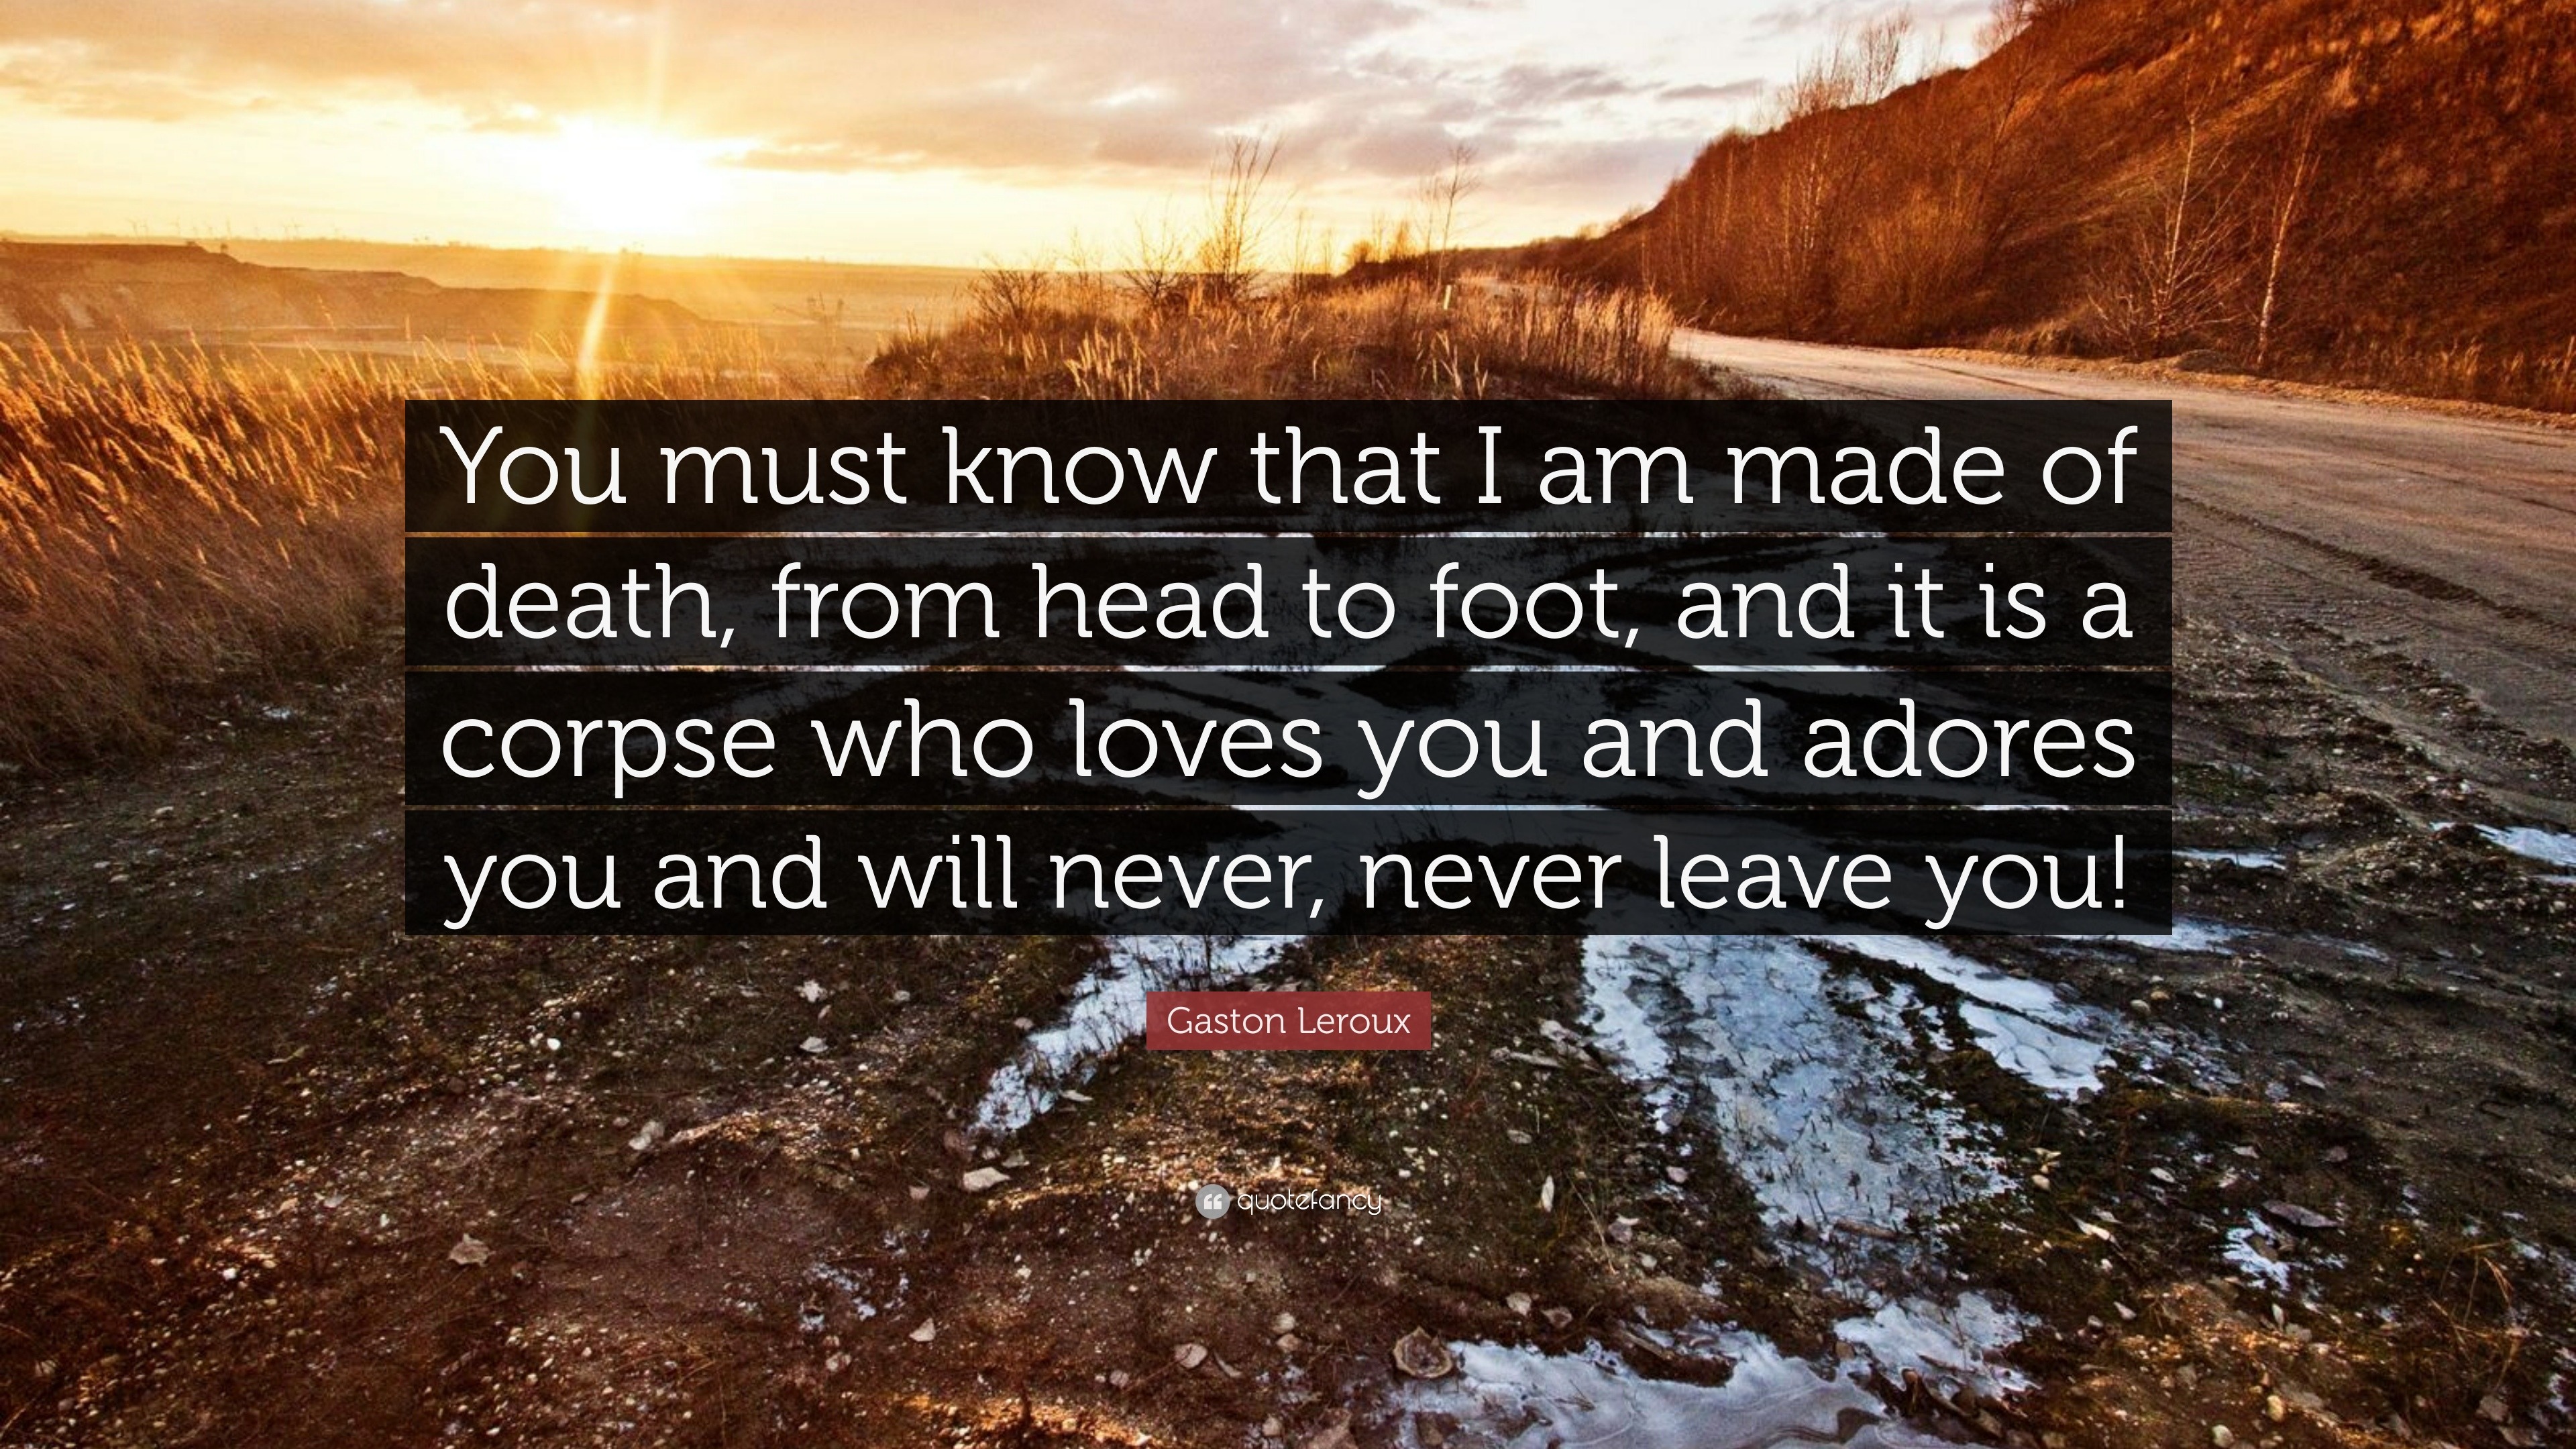 Gaston Leroux Quote “You must know that I am made of from